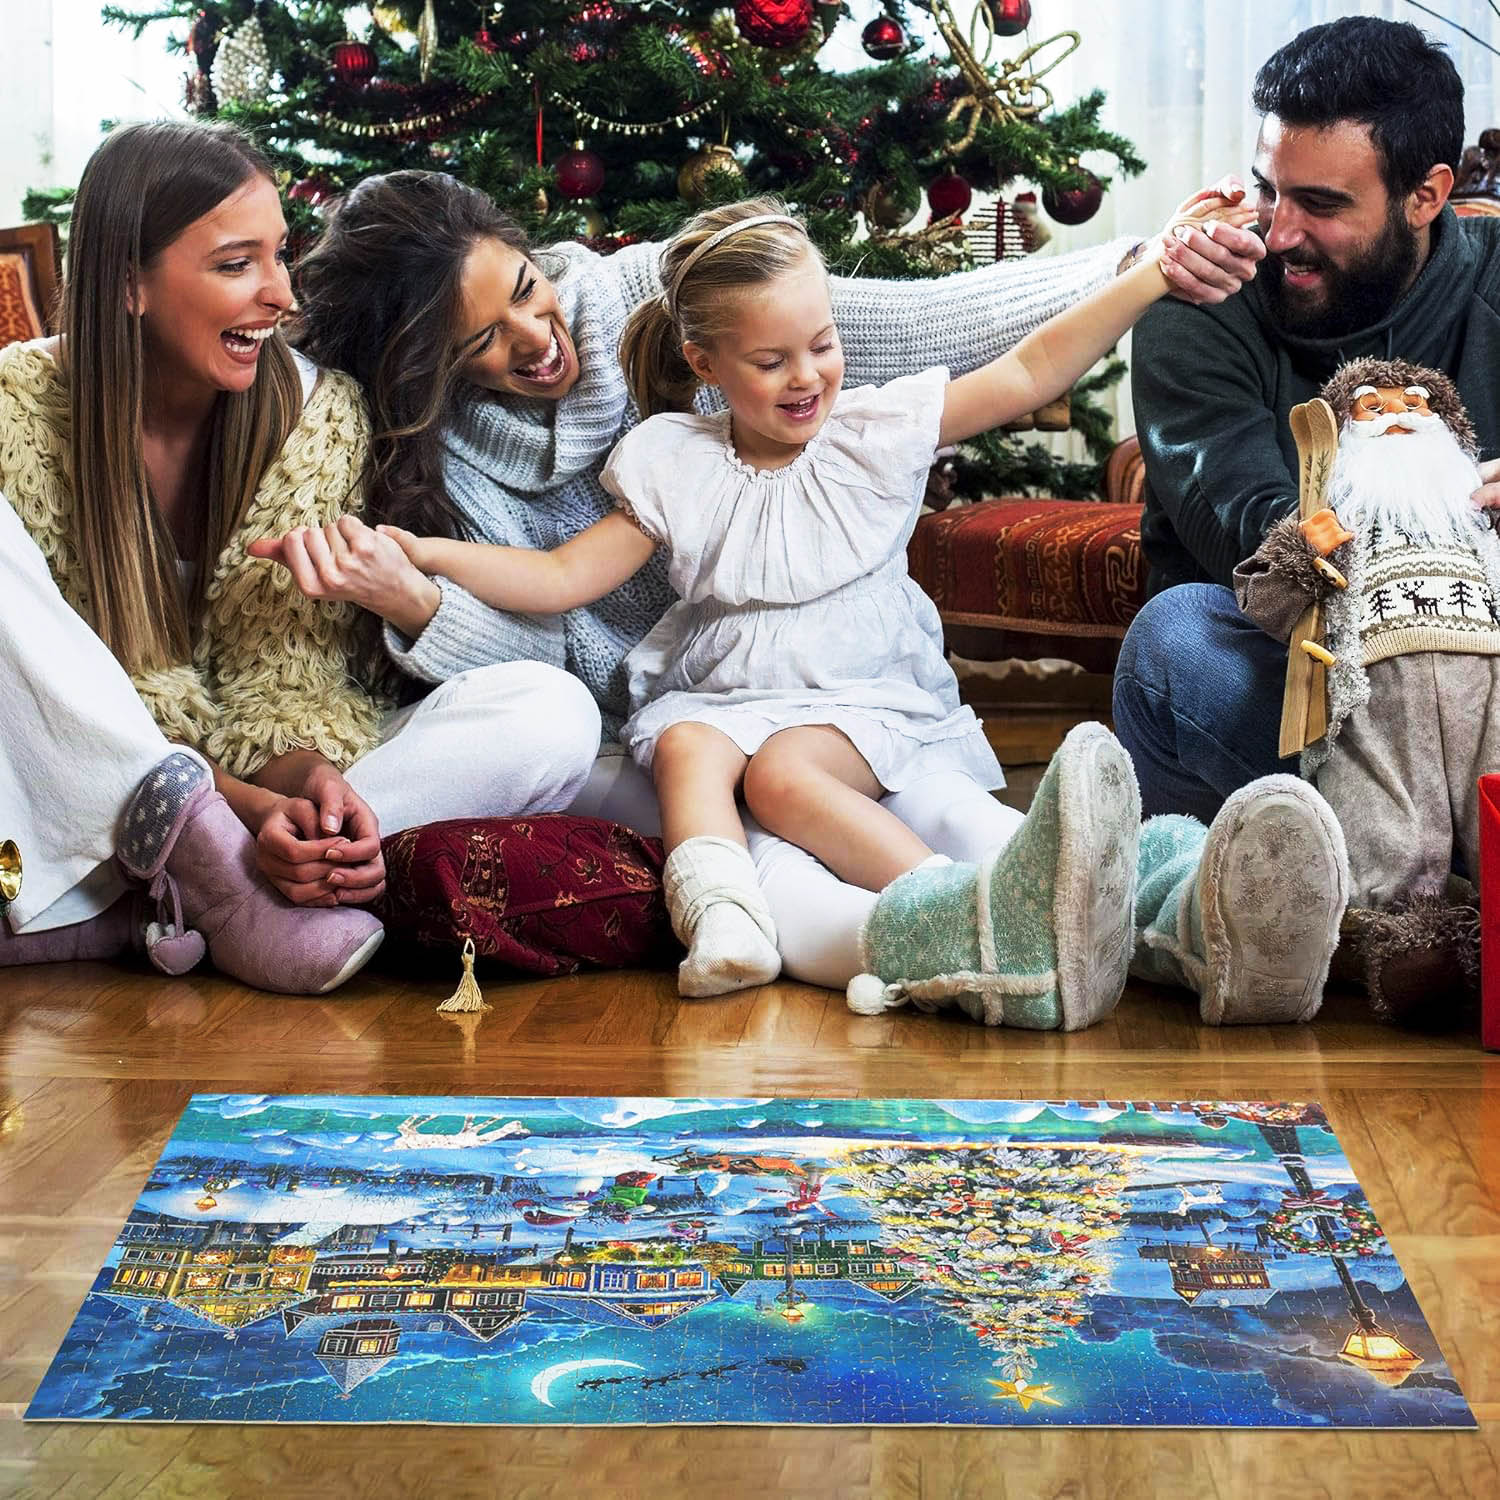 Who Creates the Best Jigsaw Puzzles for Adults?